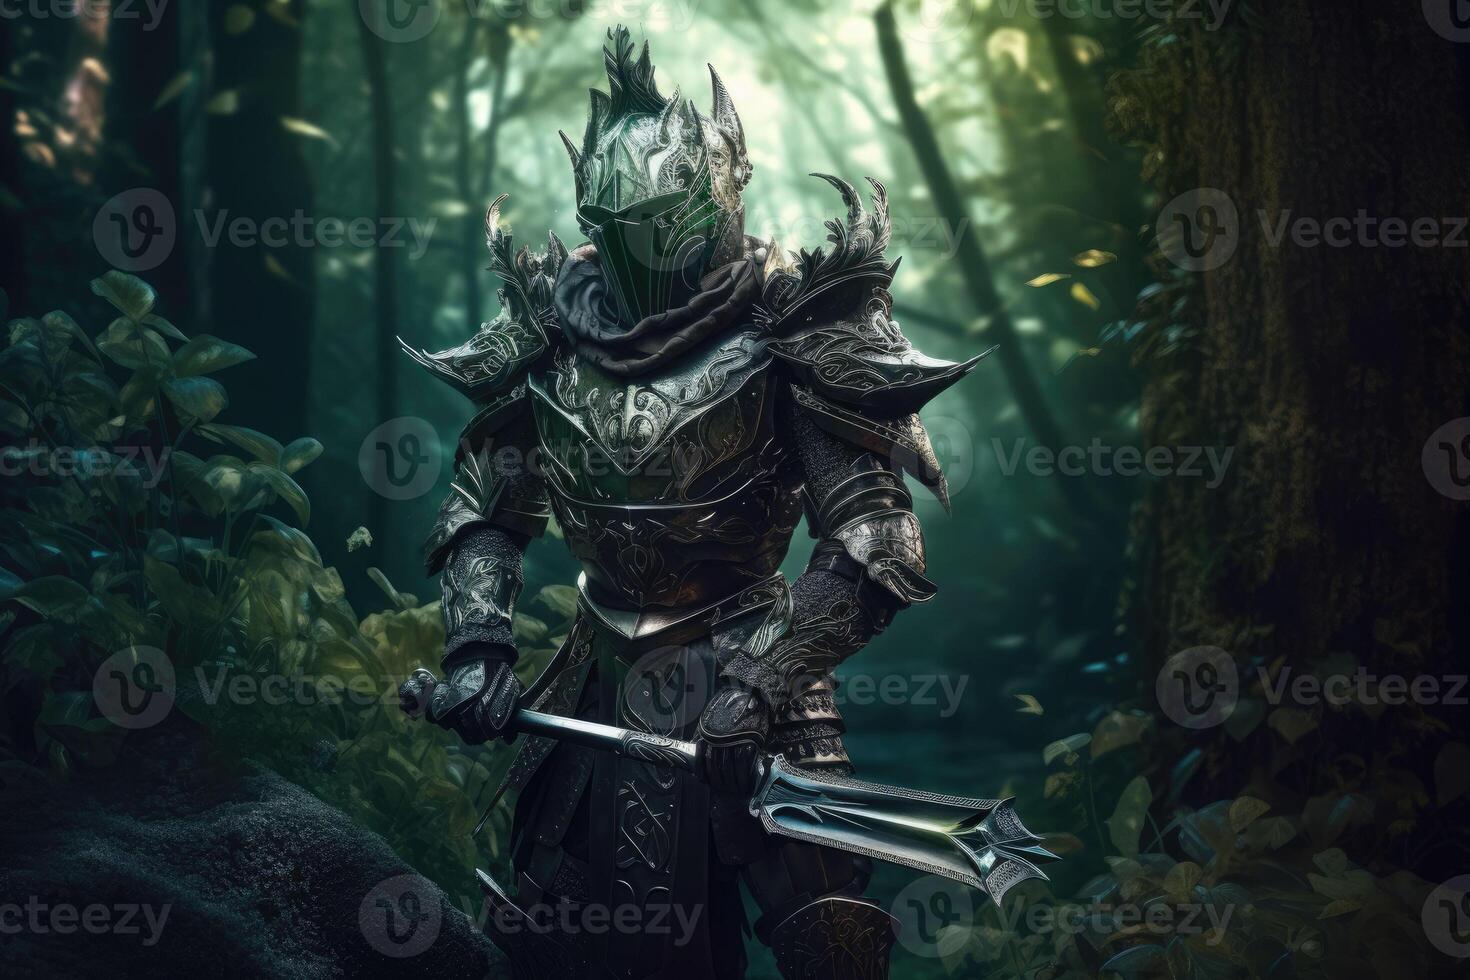 Fantasy knight with old armor in the ancient forest. photo